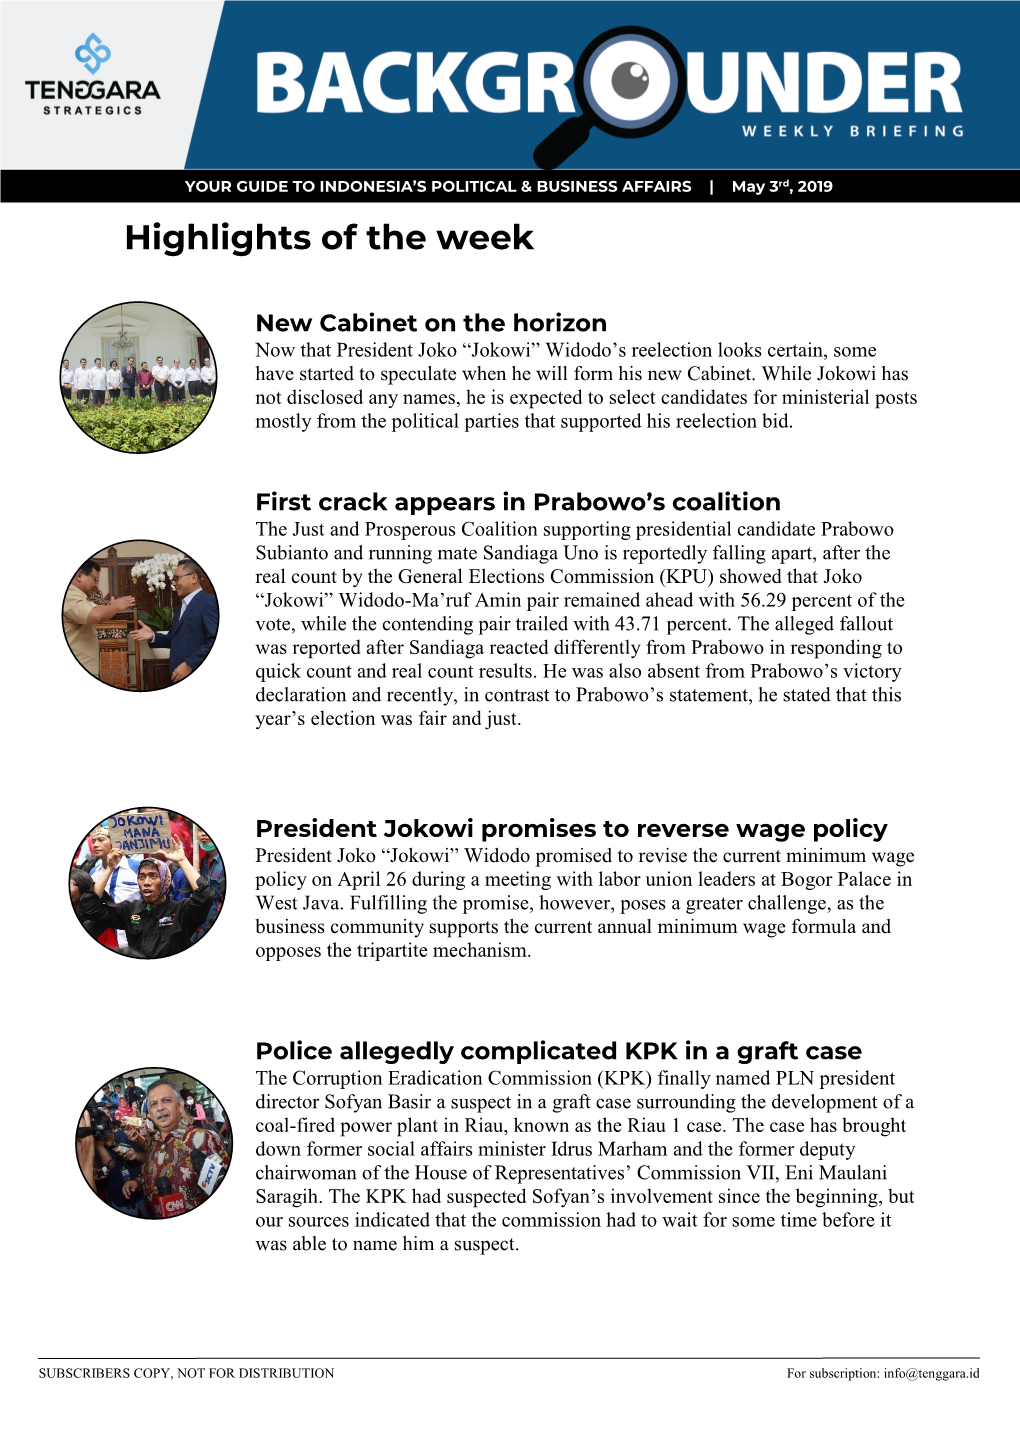 Highlights of the Week